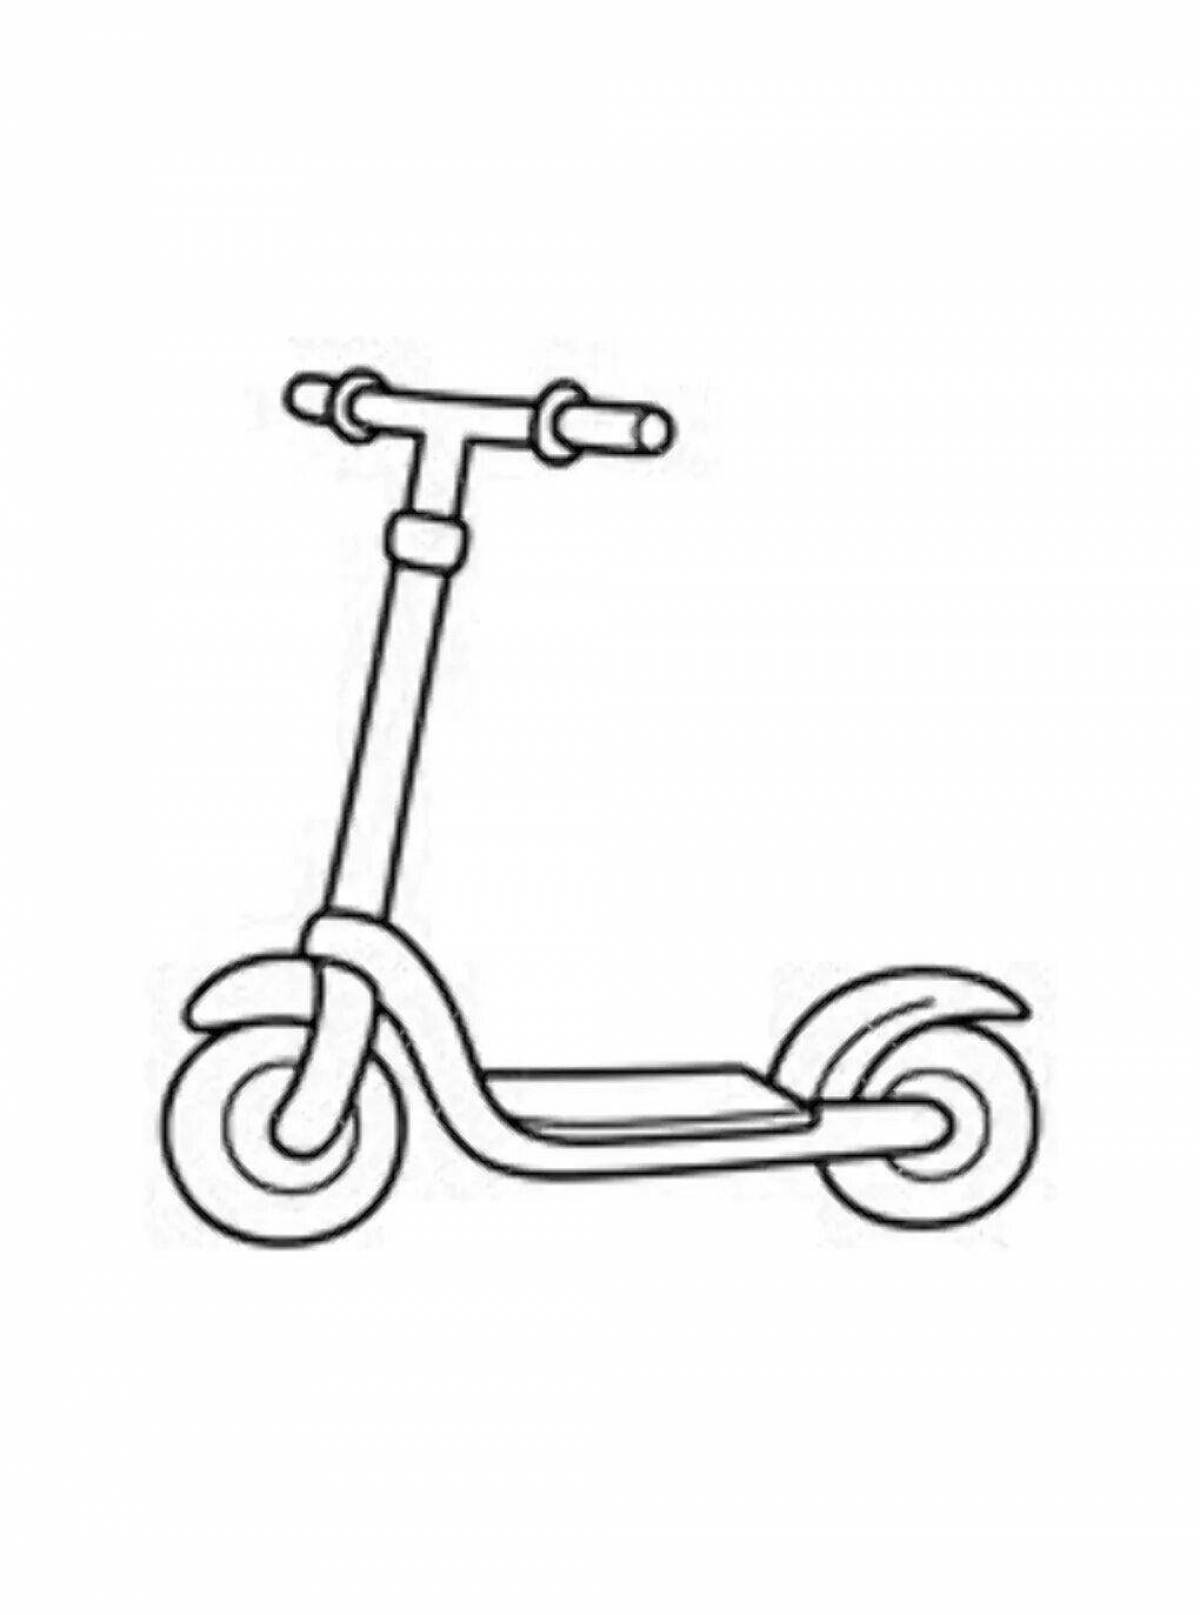 Colorful scooter coloring page for kids